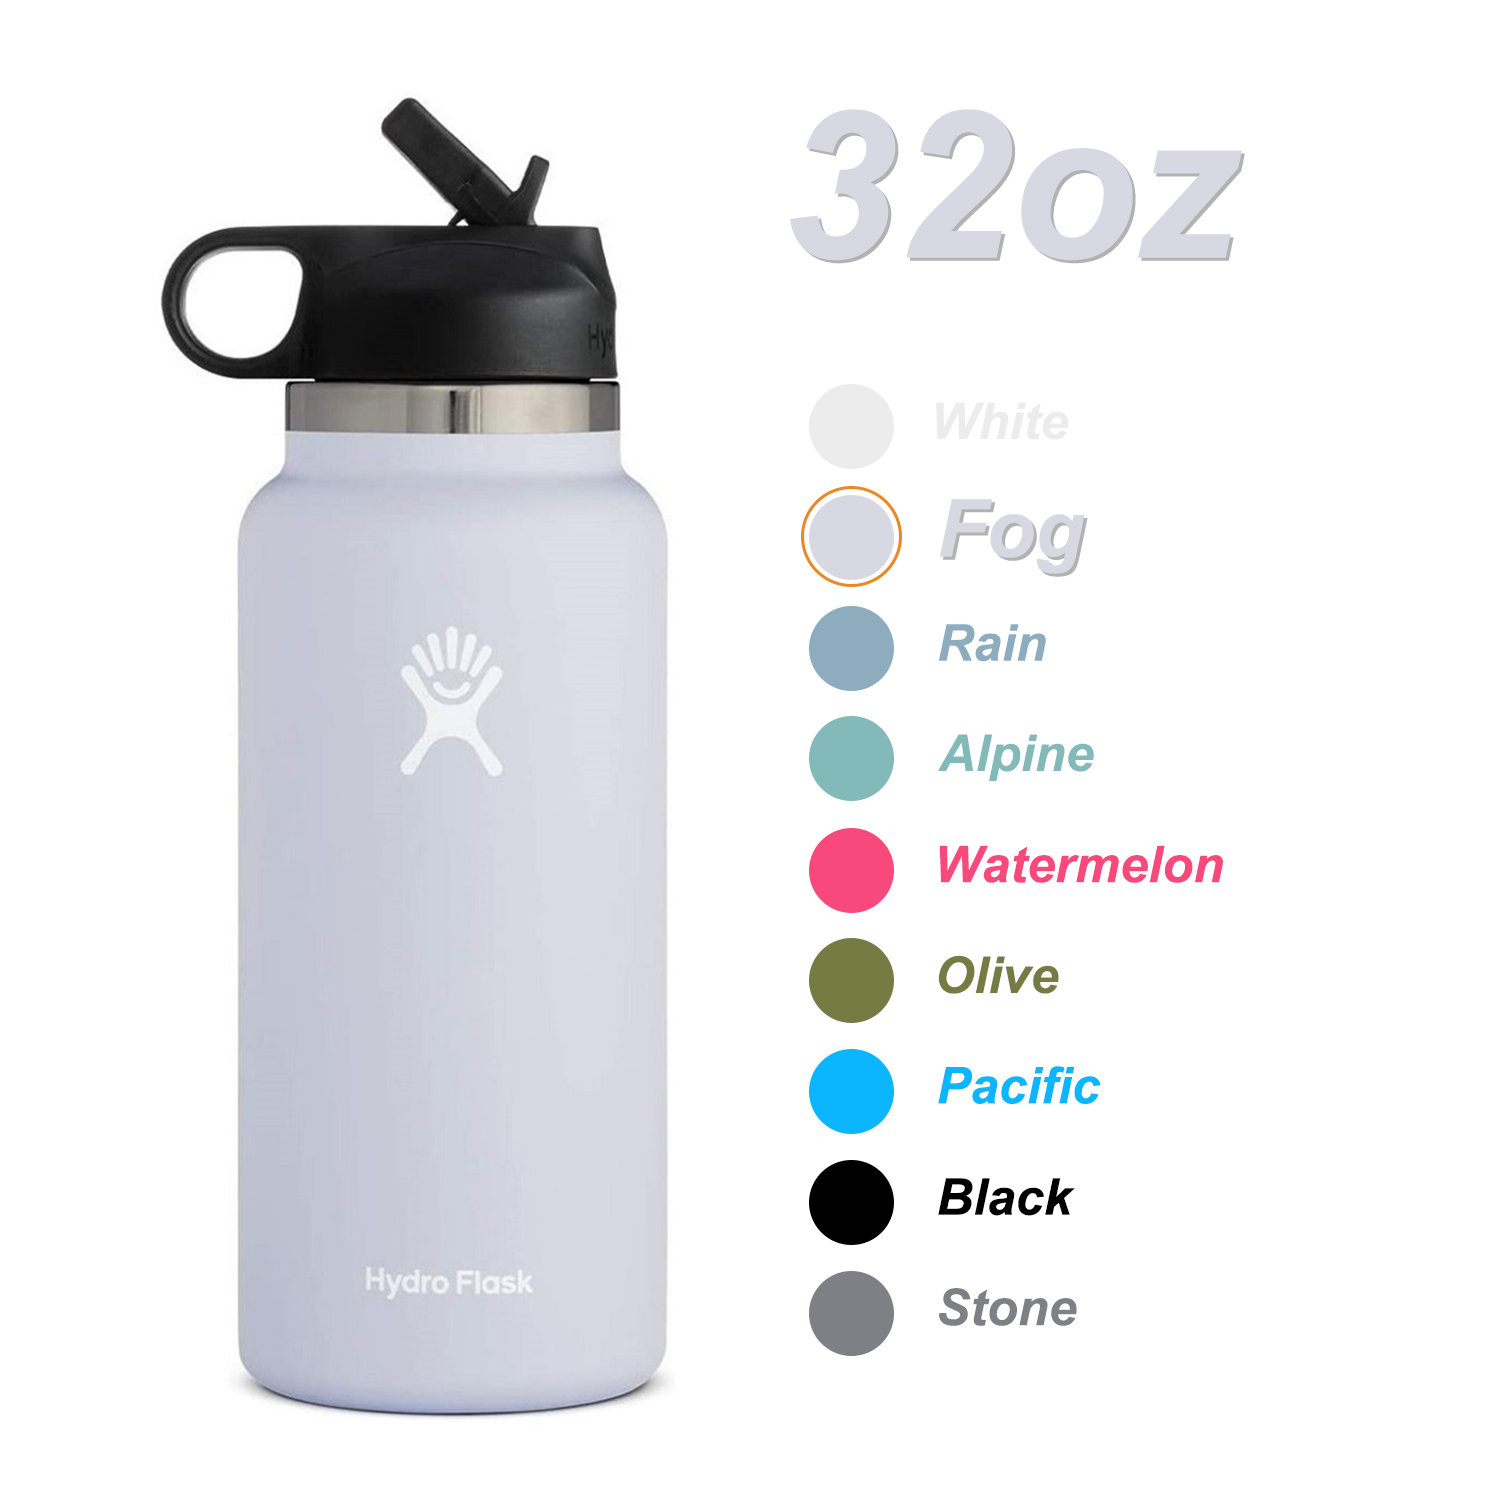 Hydro Flask Hydro Flask* Vacuum Insulated Stainless Steel Water Bottle Wide Mouth Travel 